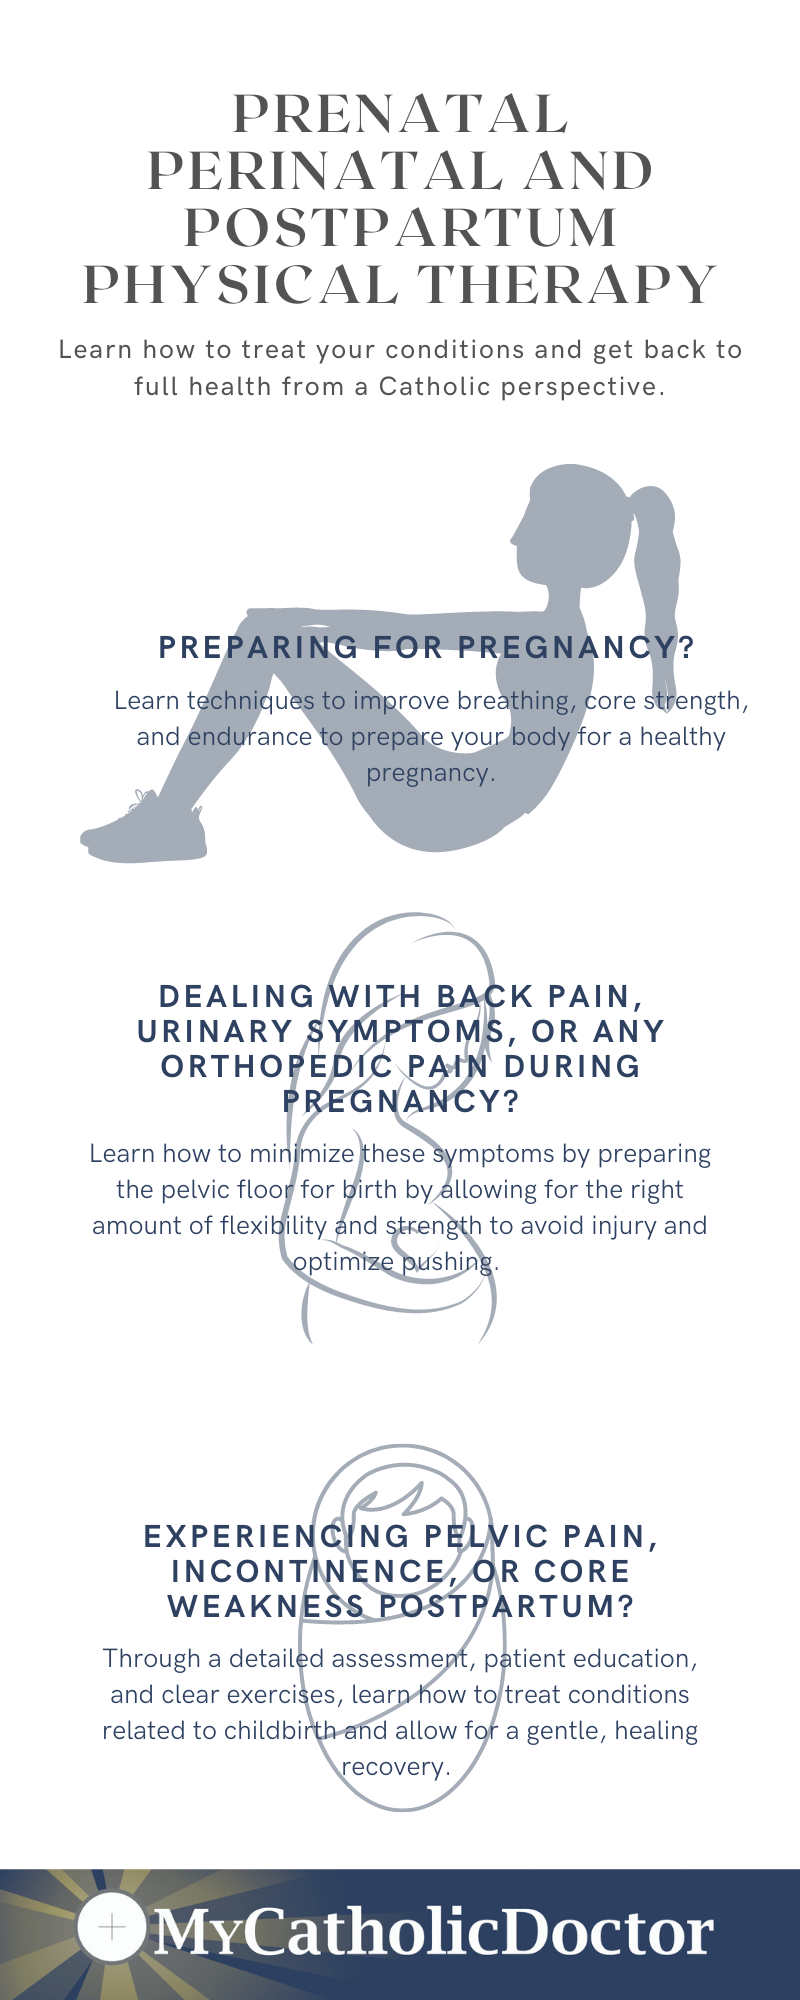 Prenatal and postpartum physical therapy